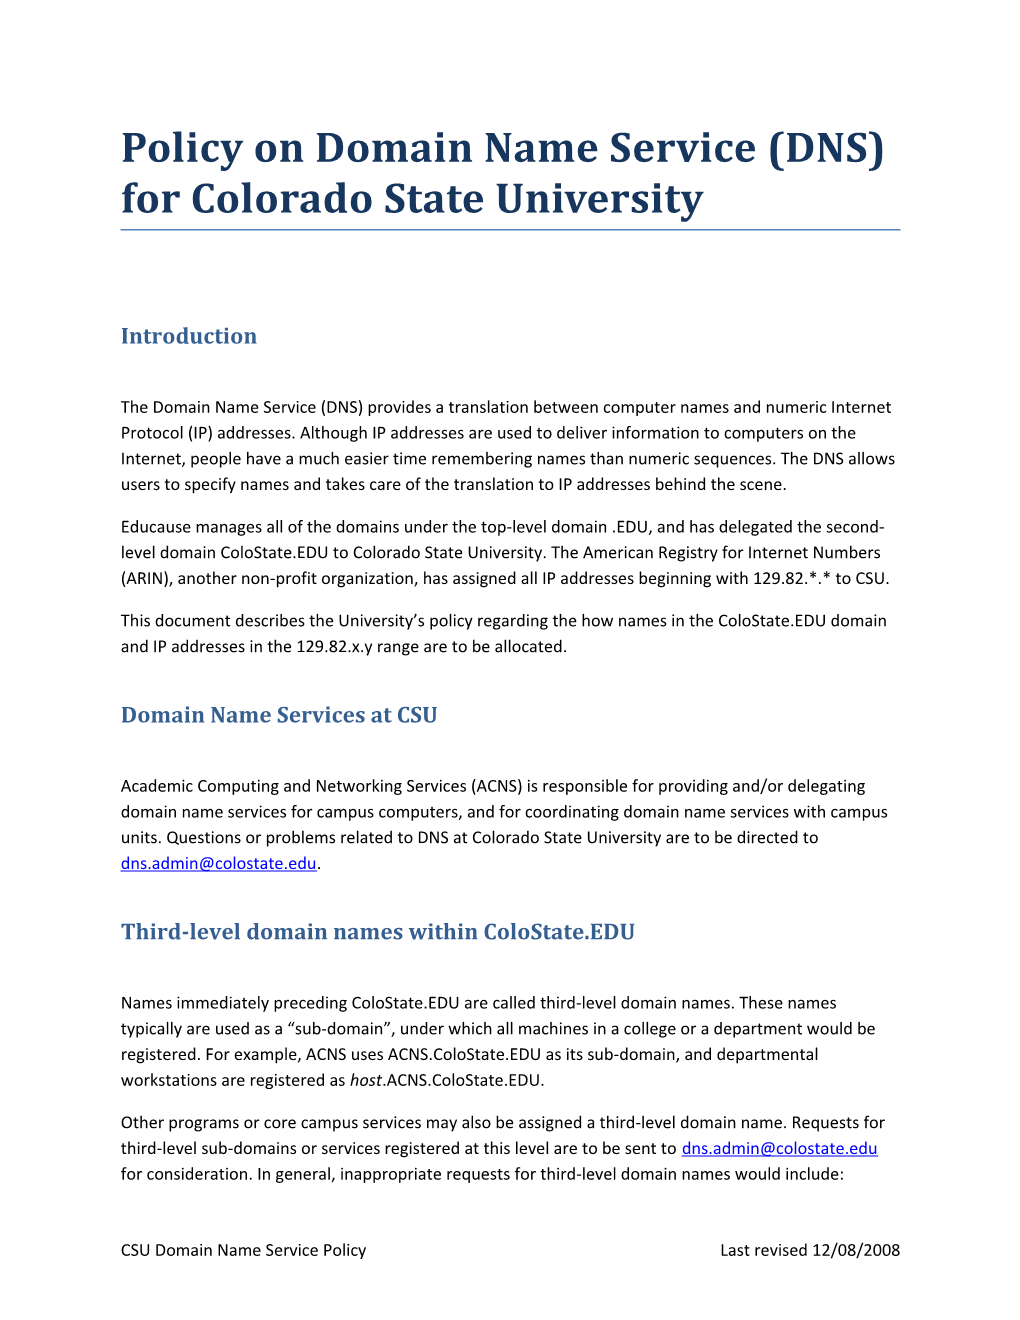 Policy on Domain Name Service (DNS) for Colorado State University